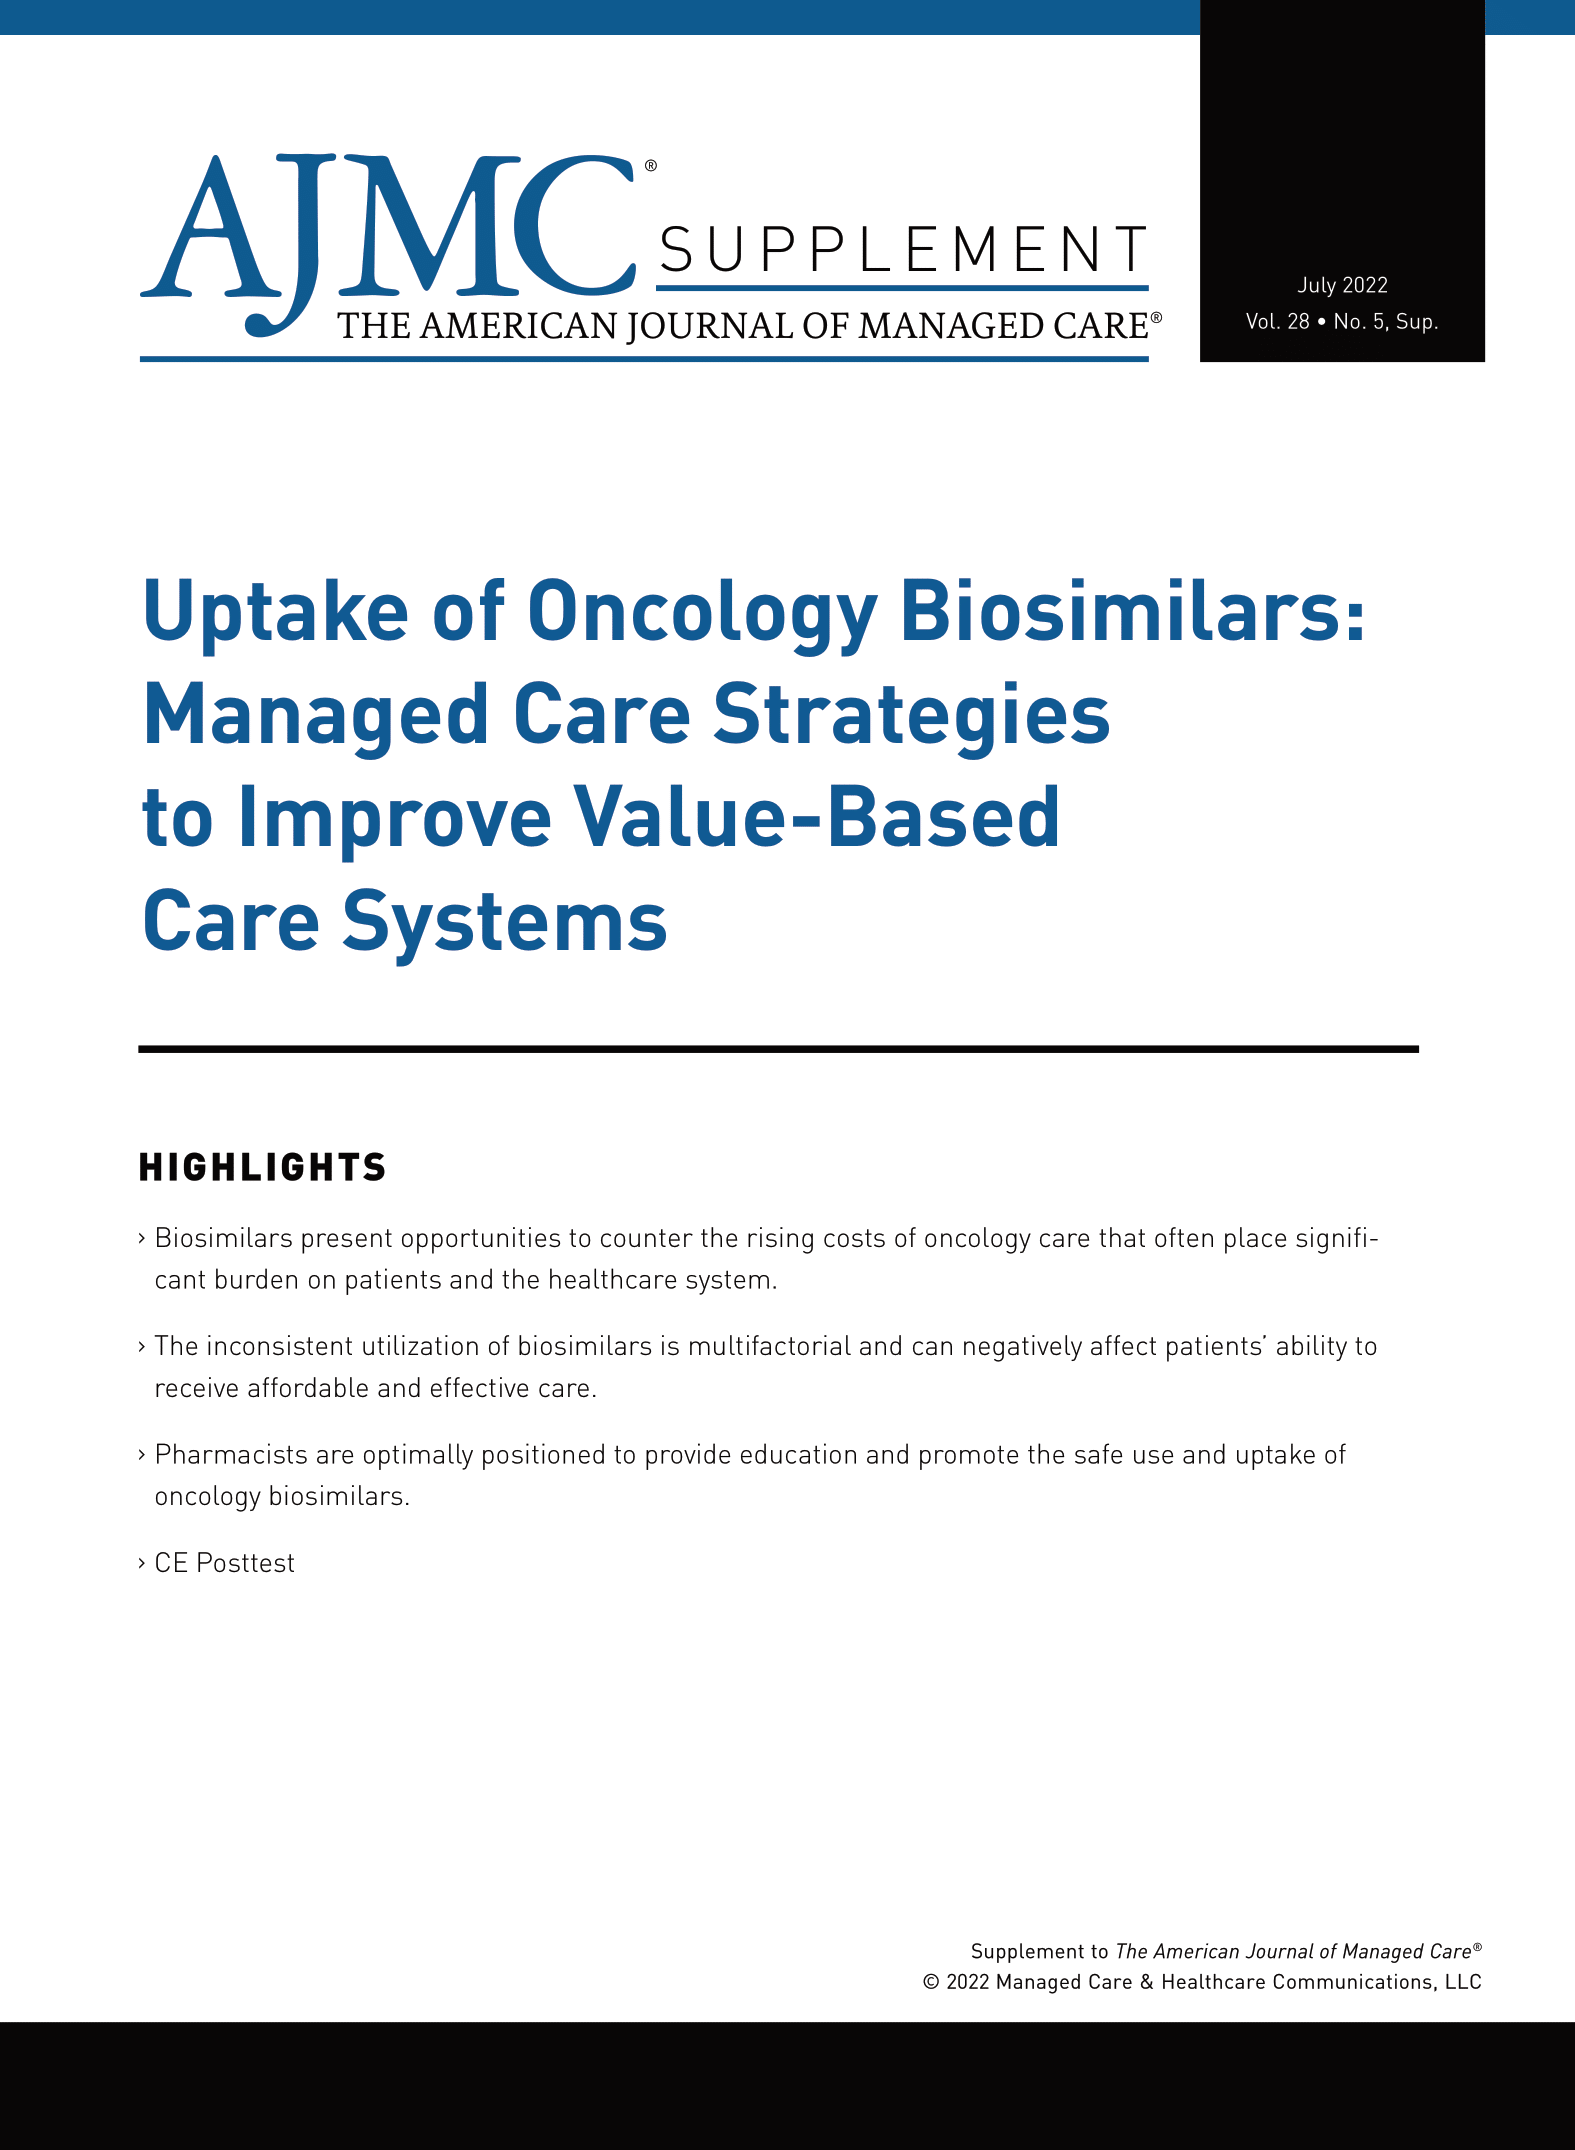 Uptake of Oncology Biosimilars: Managed Care Strategies to Improve Value-Based Care Systems